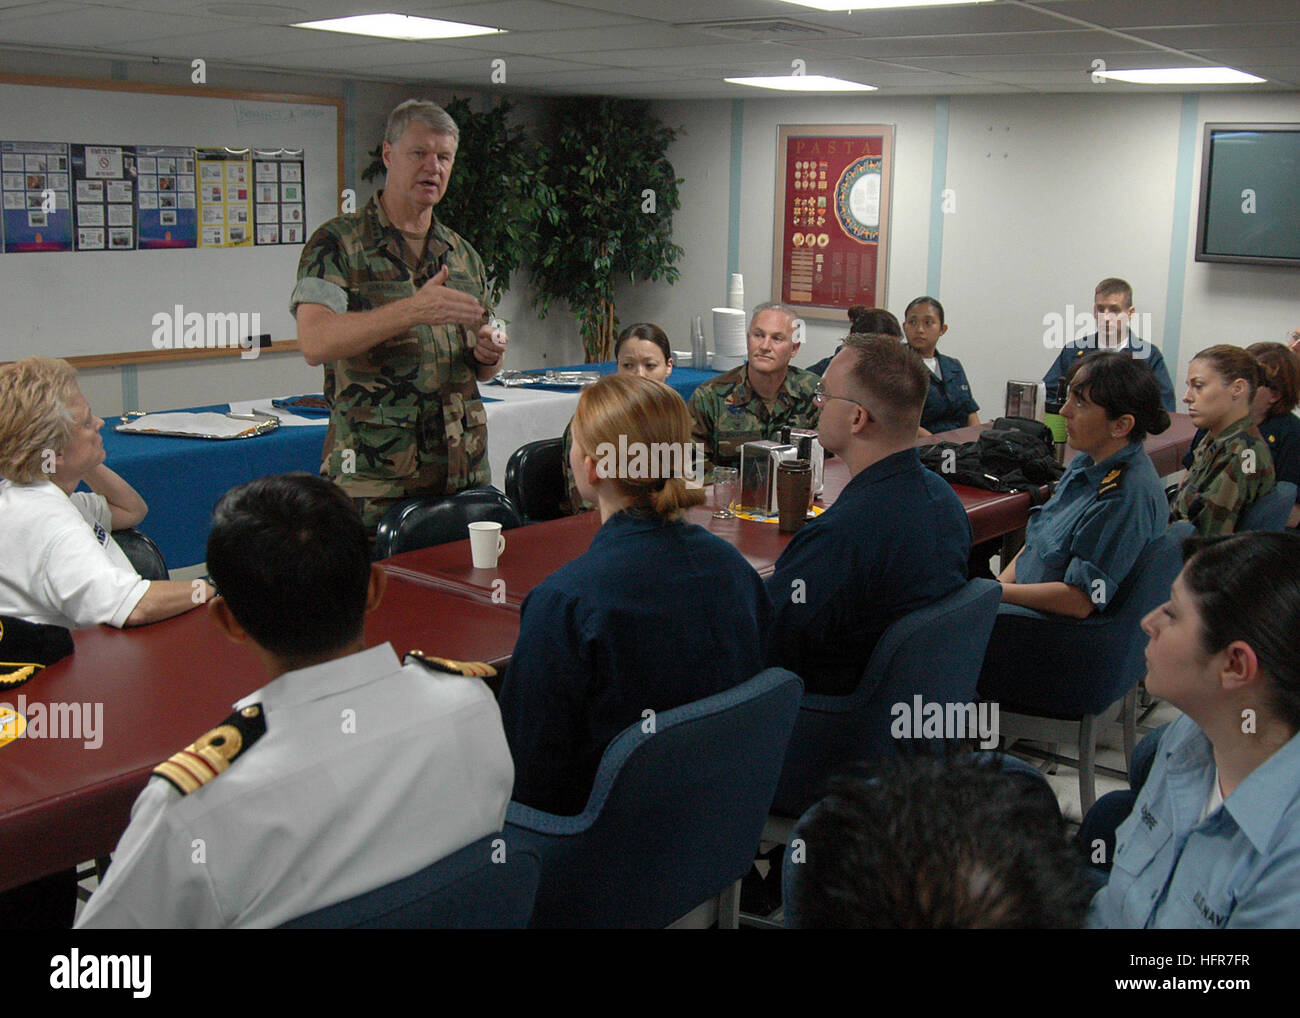 060608-N-3931M-144 Jolo, Philippines (June 8, 2006) Commander, U.S. Pacific Fleet Adm. Gary Roughead, talks with members of the Medical Treatment Facility during a tour aboard the U.S. Military Sealift Command (MSC) Hospital ship USNS Mercy (T-AH 19) while the ship visits the city on a scheduled humanitarian mission. Mercy is on a five-month humanitarian assistance deployment to South and Southeast Asia, and the Pacific Islands. Mercy is uniquely capable of supporting medical and humanitarian assistance needs and is configured with special medical equipment and a robust multi-specialized medic Stock Photo